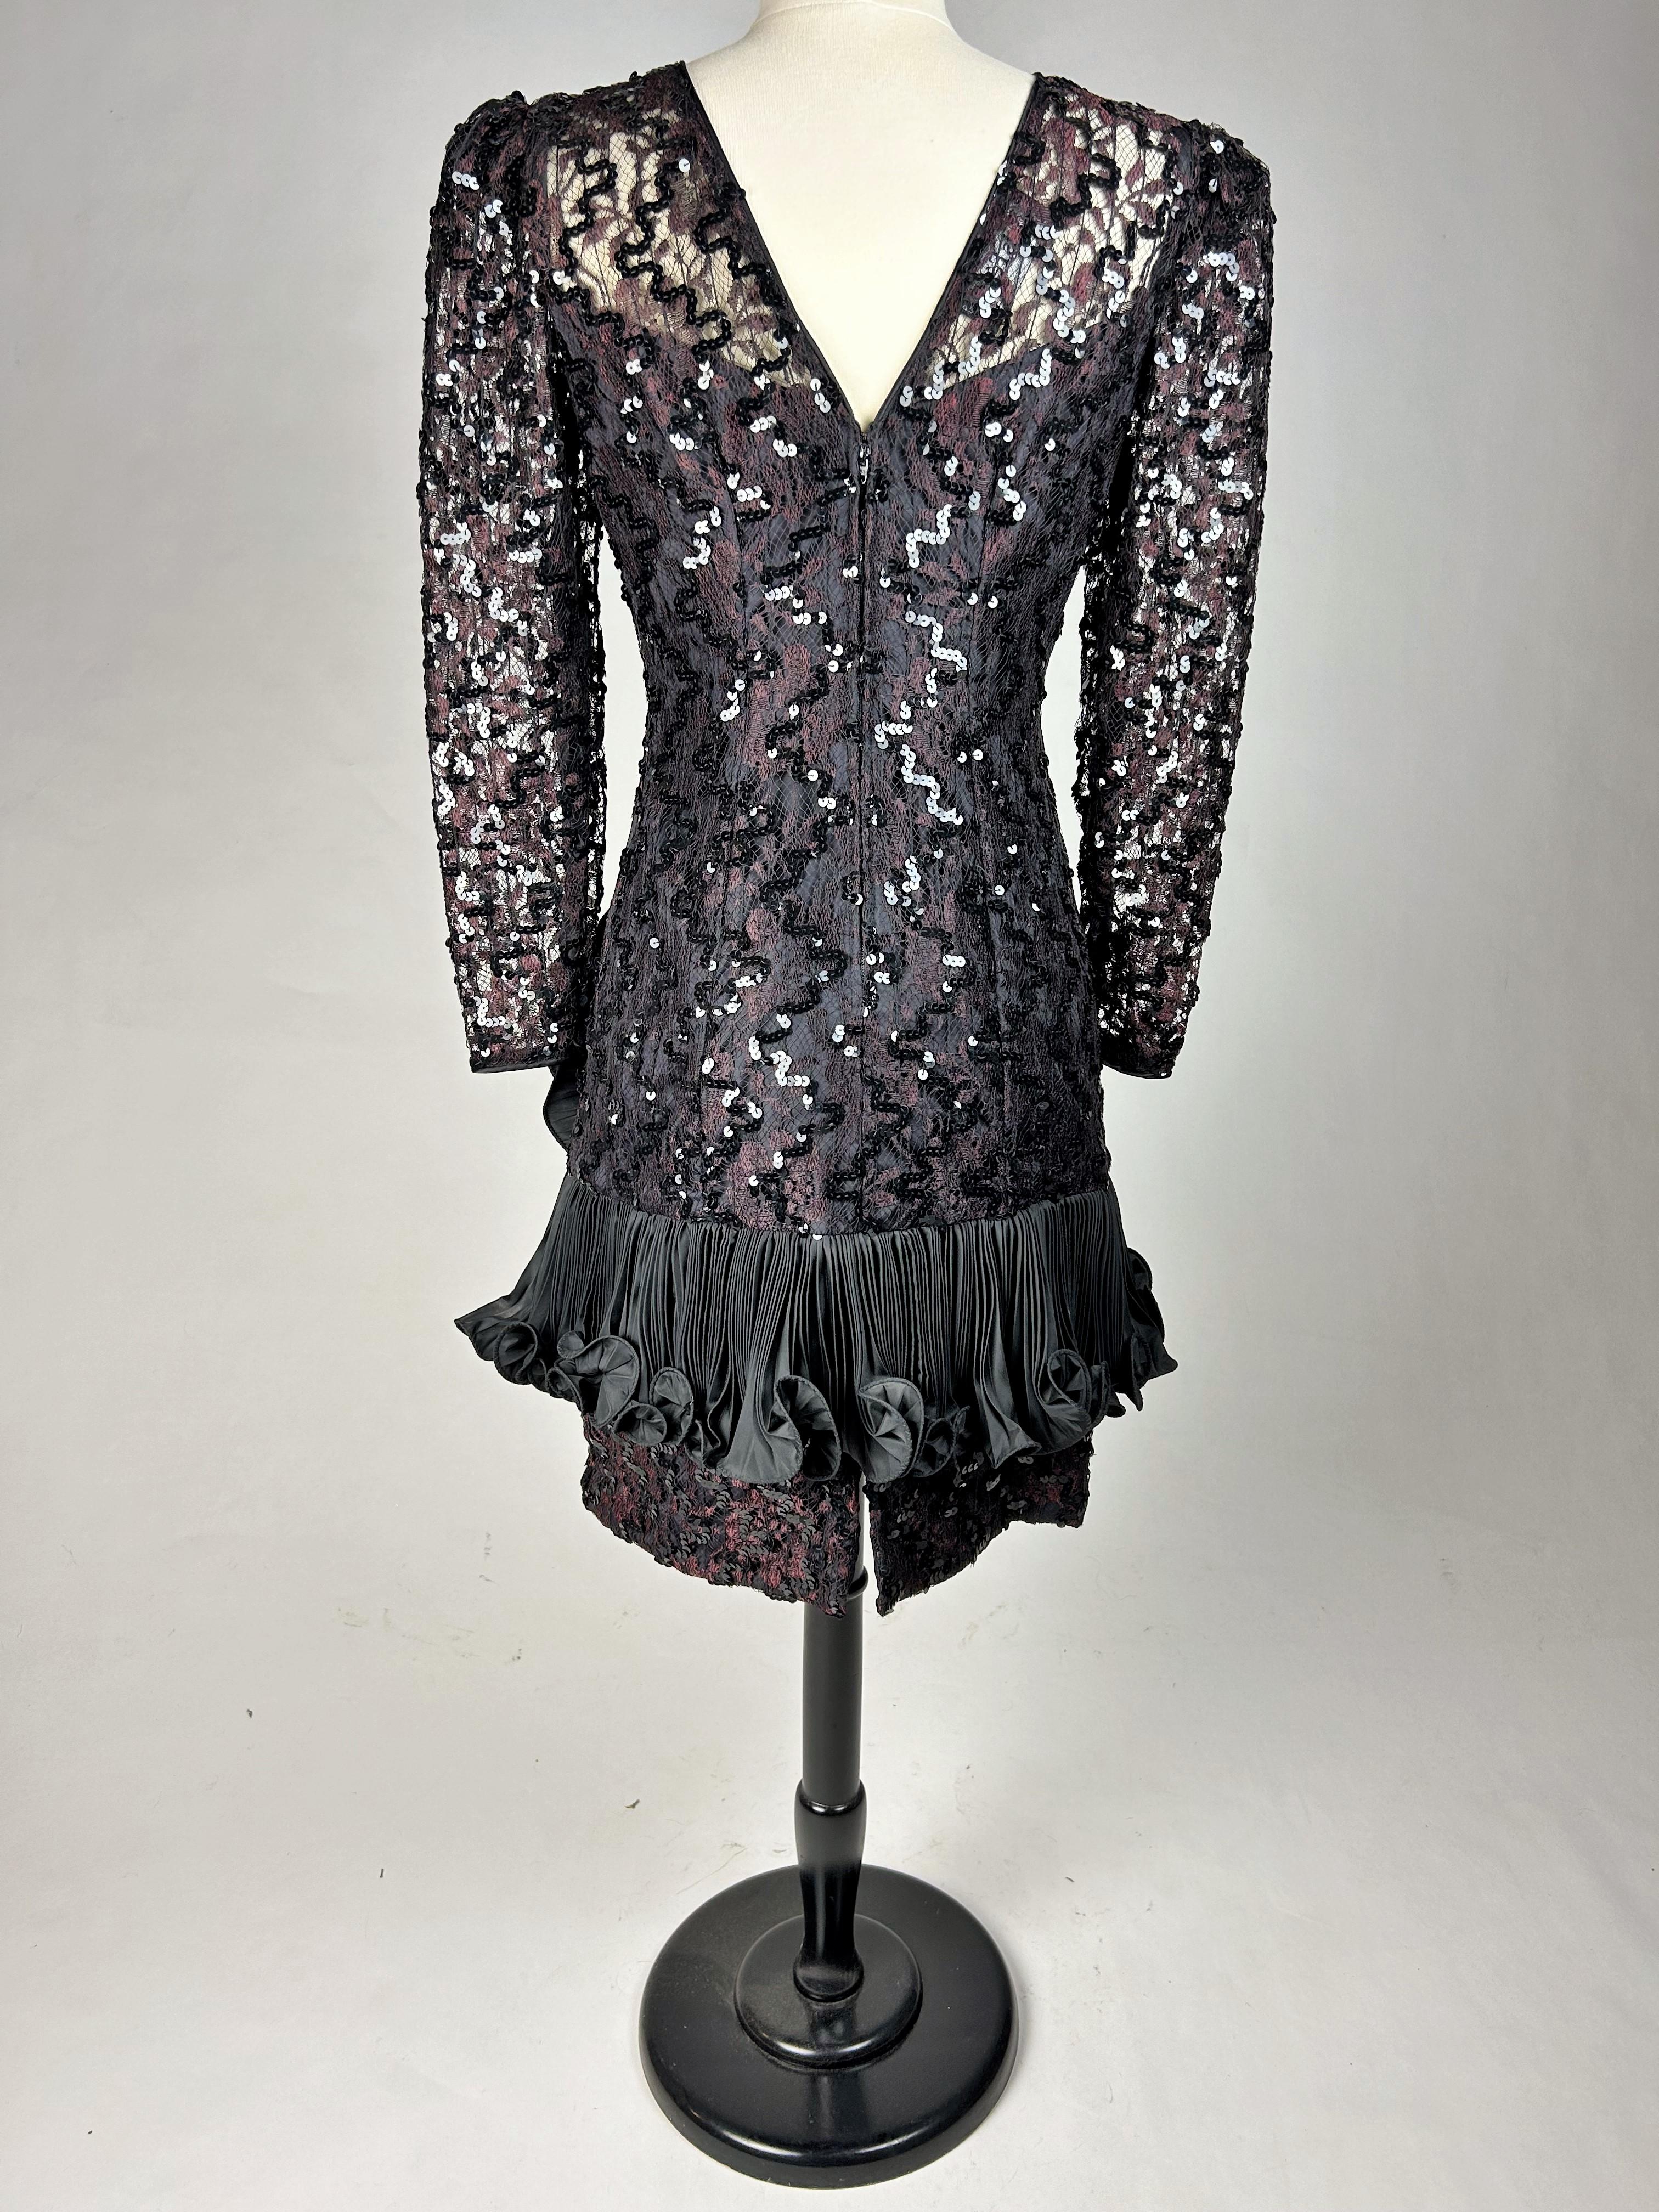 Cocktail dress in lace and sequins by Louis Féraud Haute Couture Circa 1985 For Sale 3